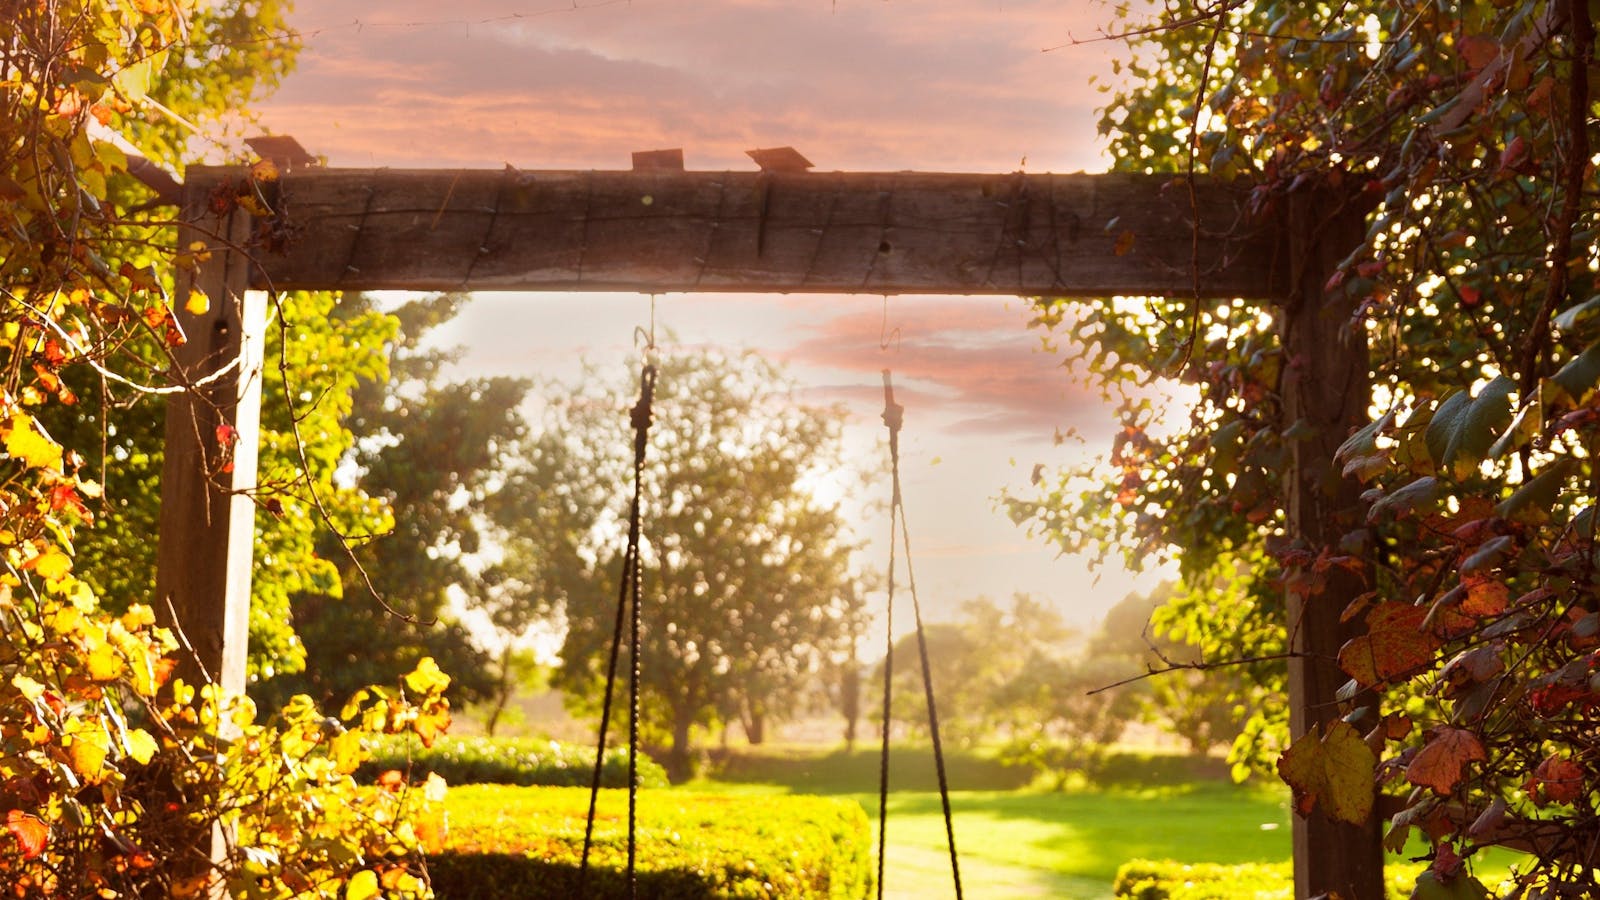 View to the west gardens, vine walkway and swing.  Glorious sunsets from this angle.